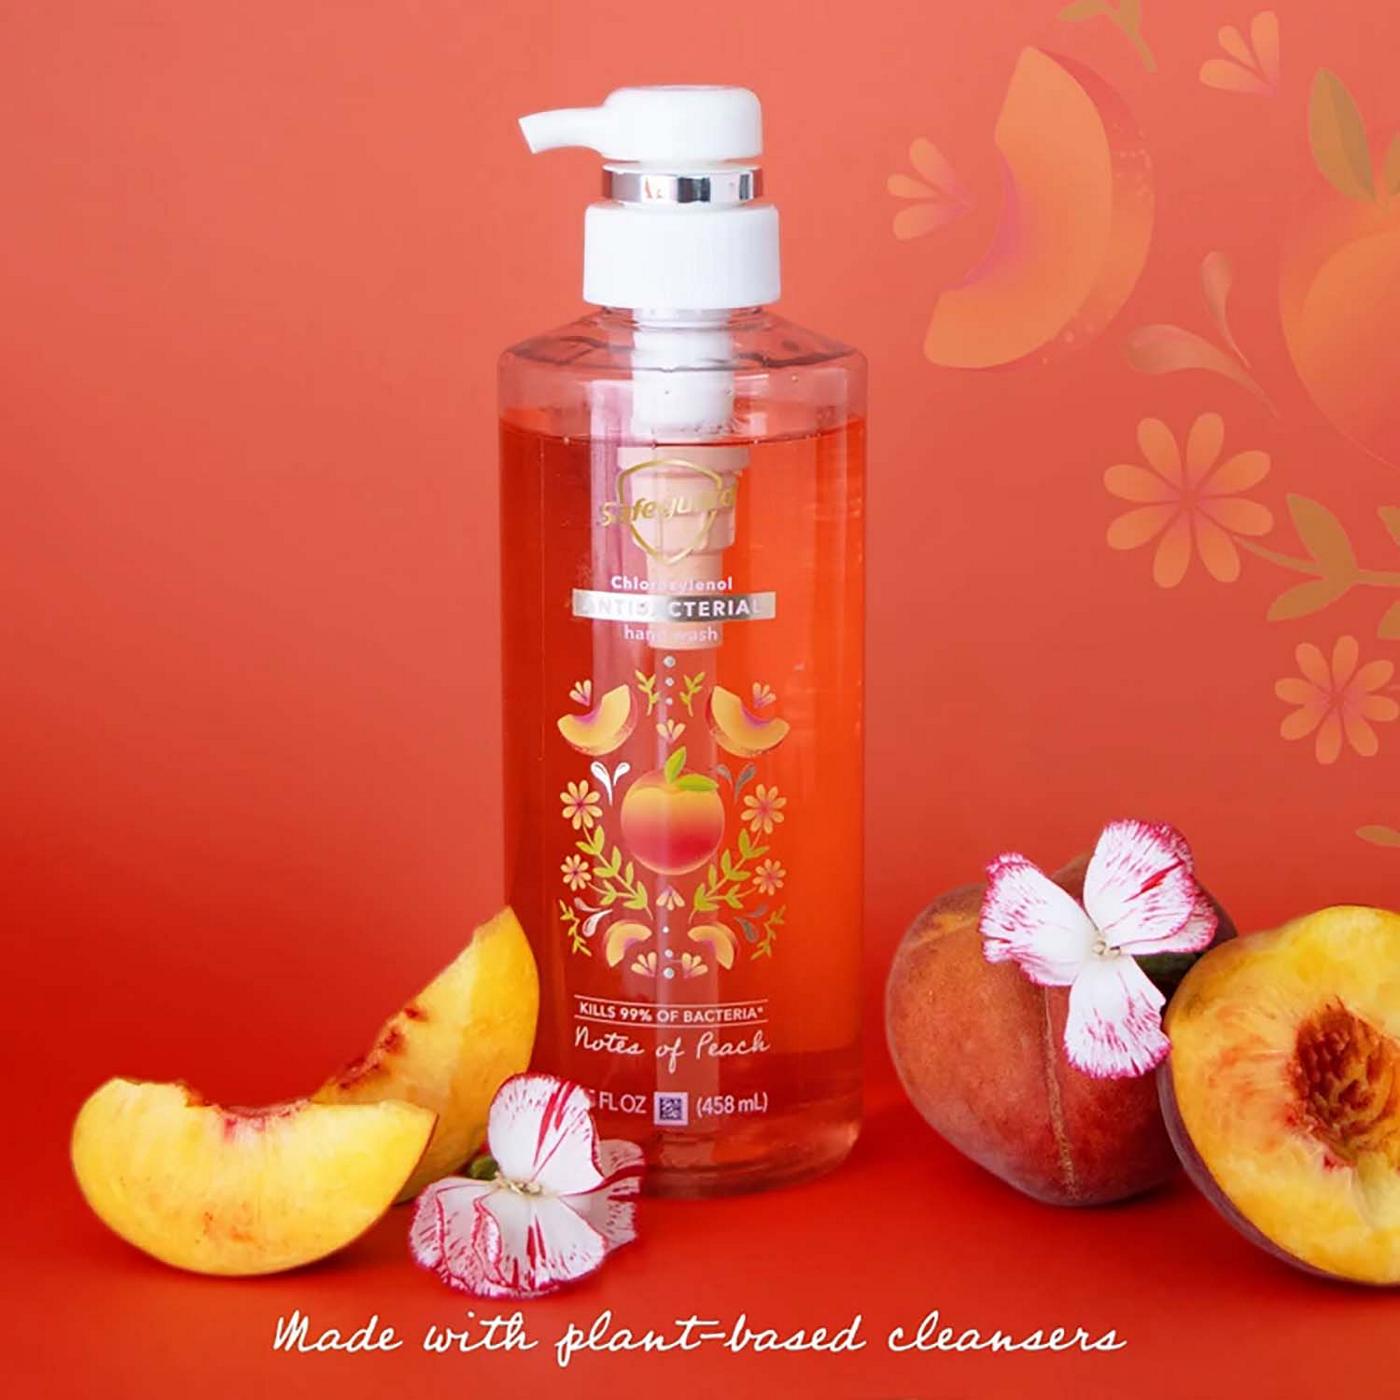 Safeguard Antibacterial Hand Soap - Notes Of Peach; image 5 of 6